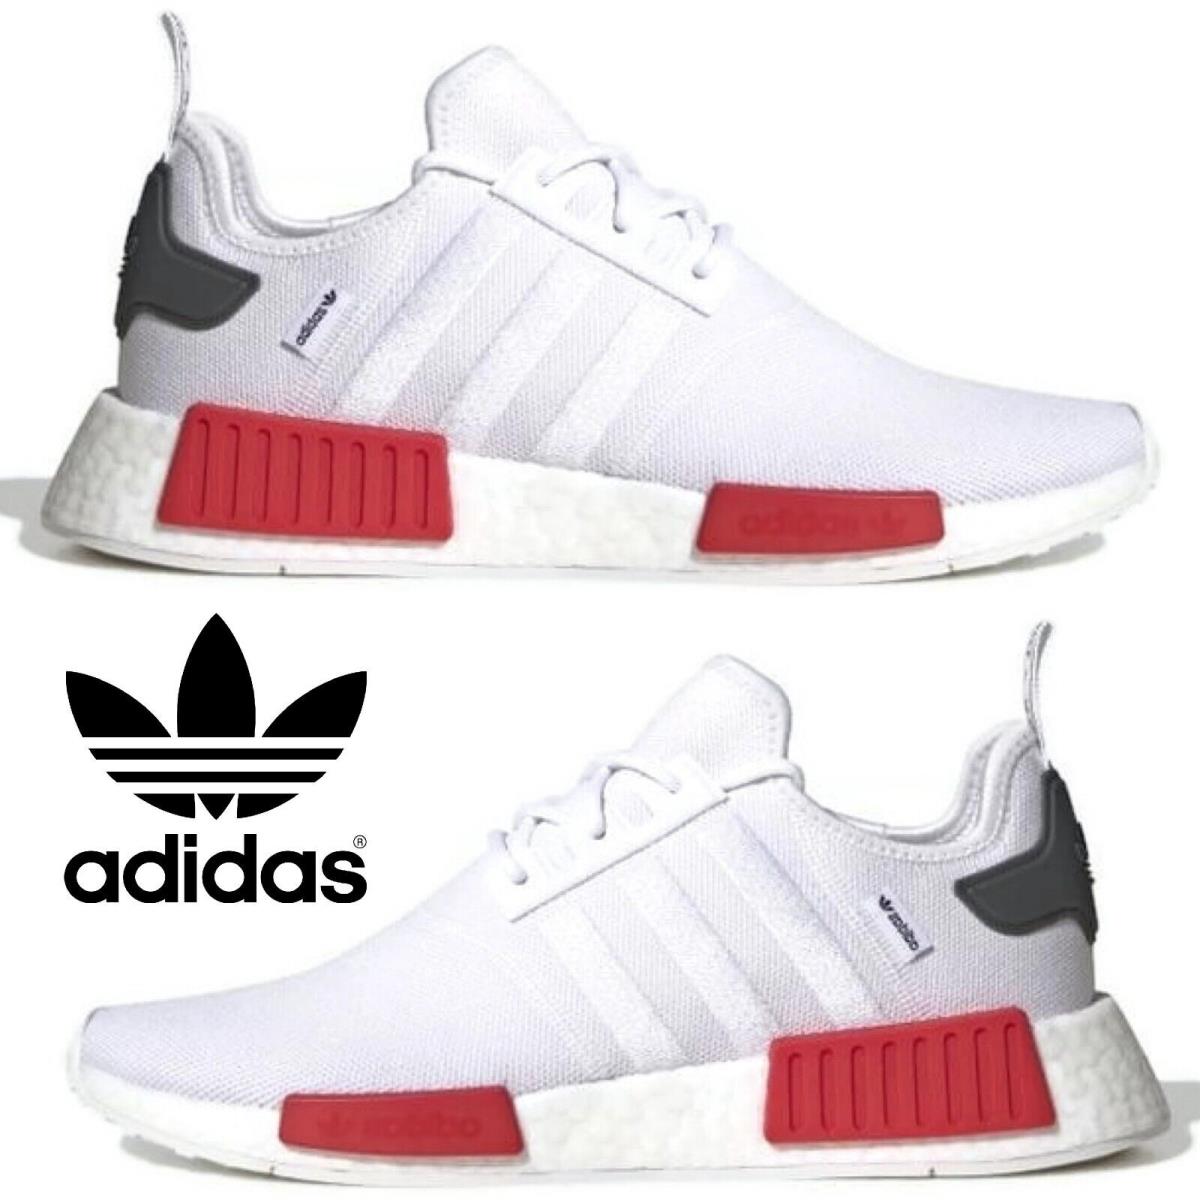 Adidas Originals Nmd R1 Men`s Sneakers Running Shoes Gym Casual Sport White - White , Cloud White / Cloud White / Vivid Red Manufacturer